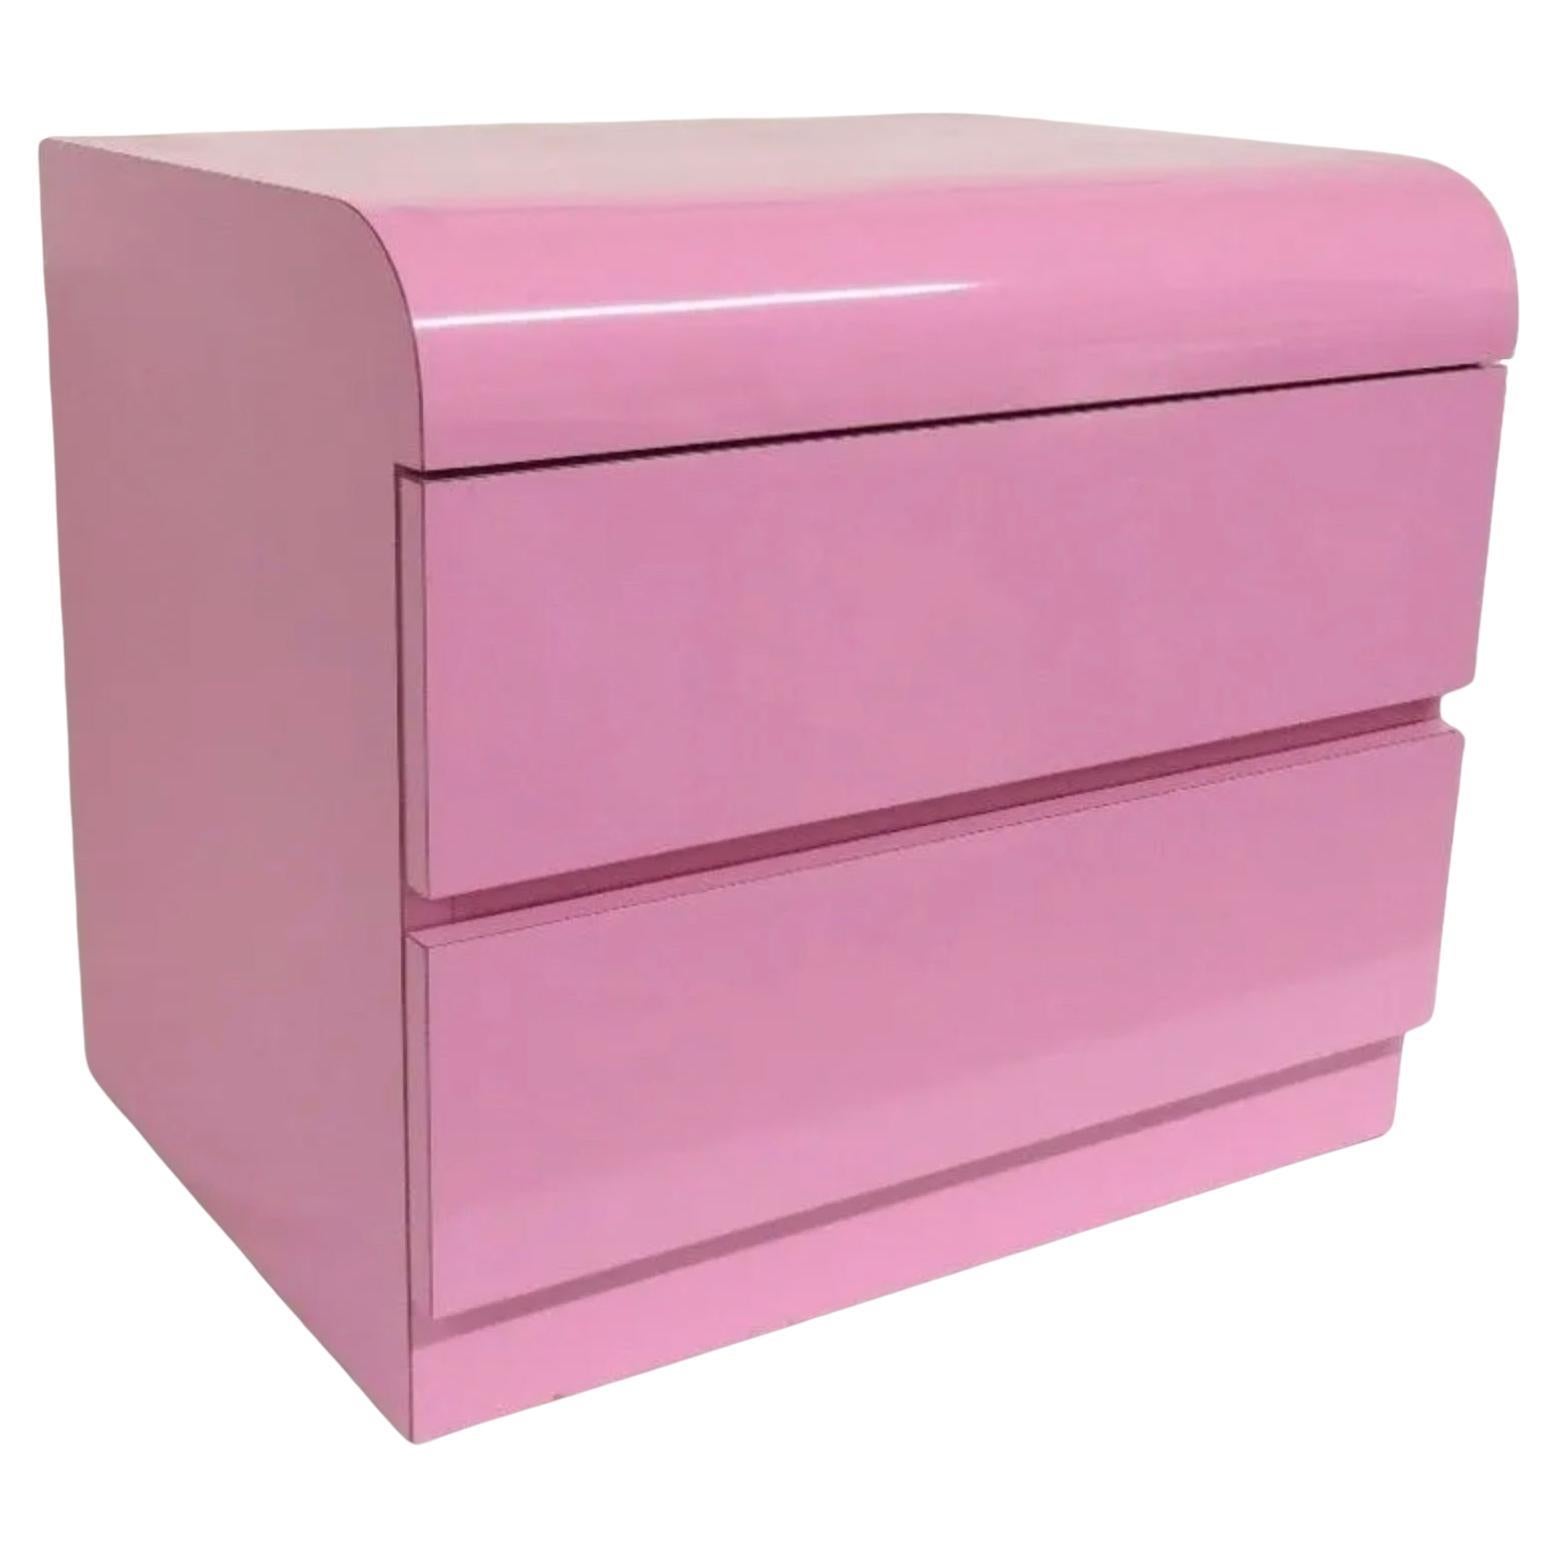 Post modern Pink Gloss Laminate waterfall 2 Drawer nightstand end table For Sale